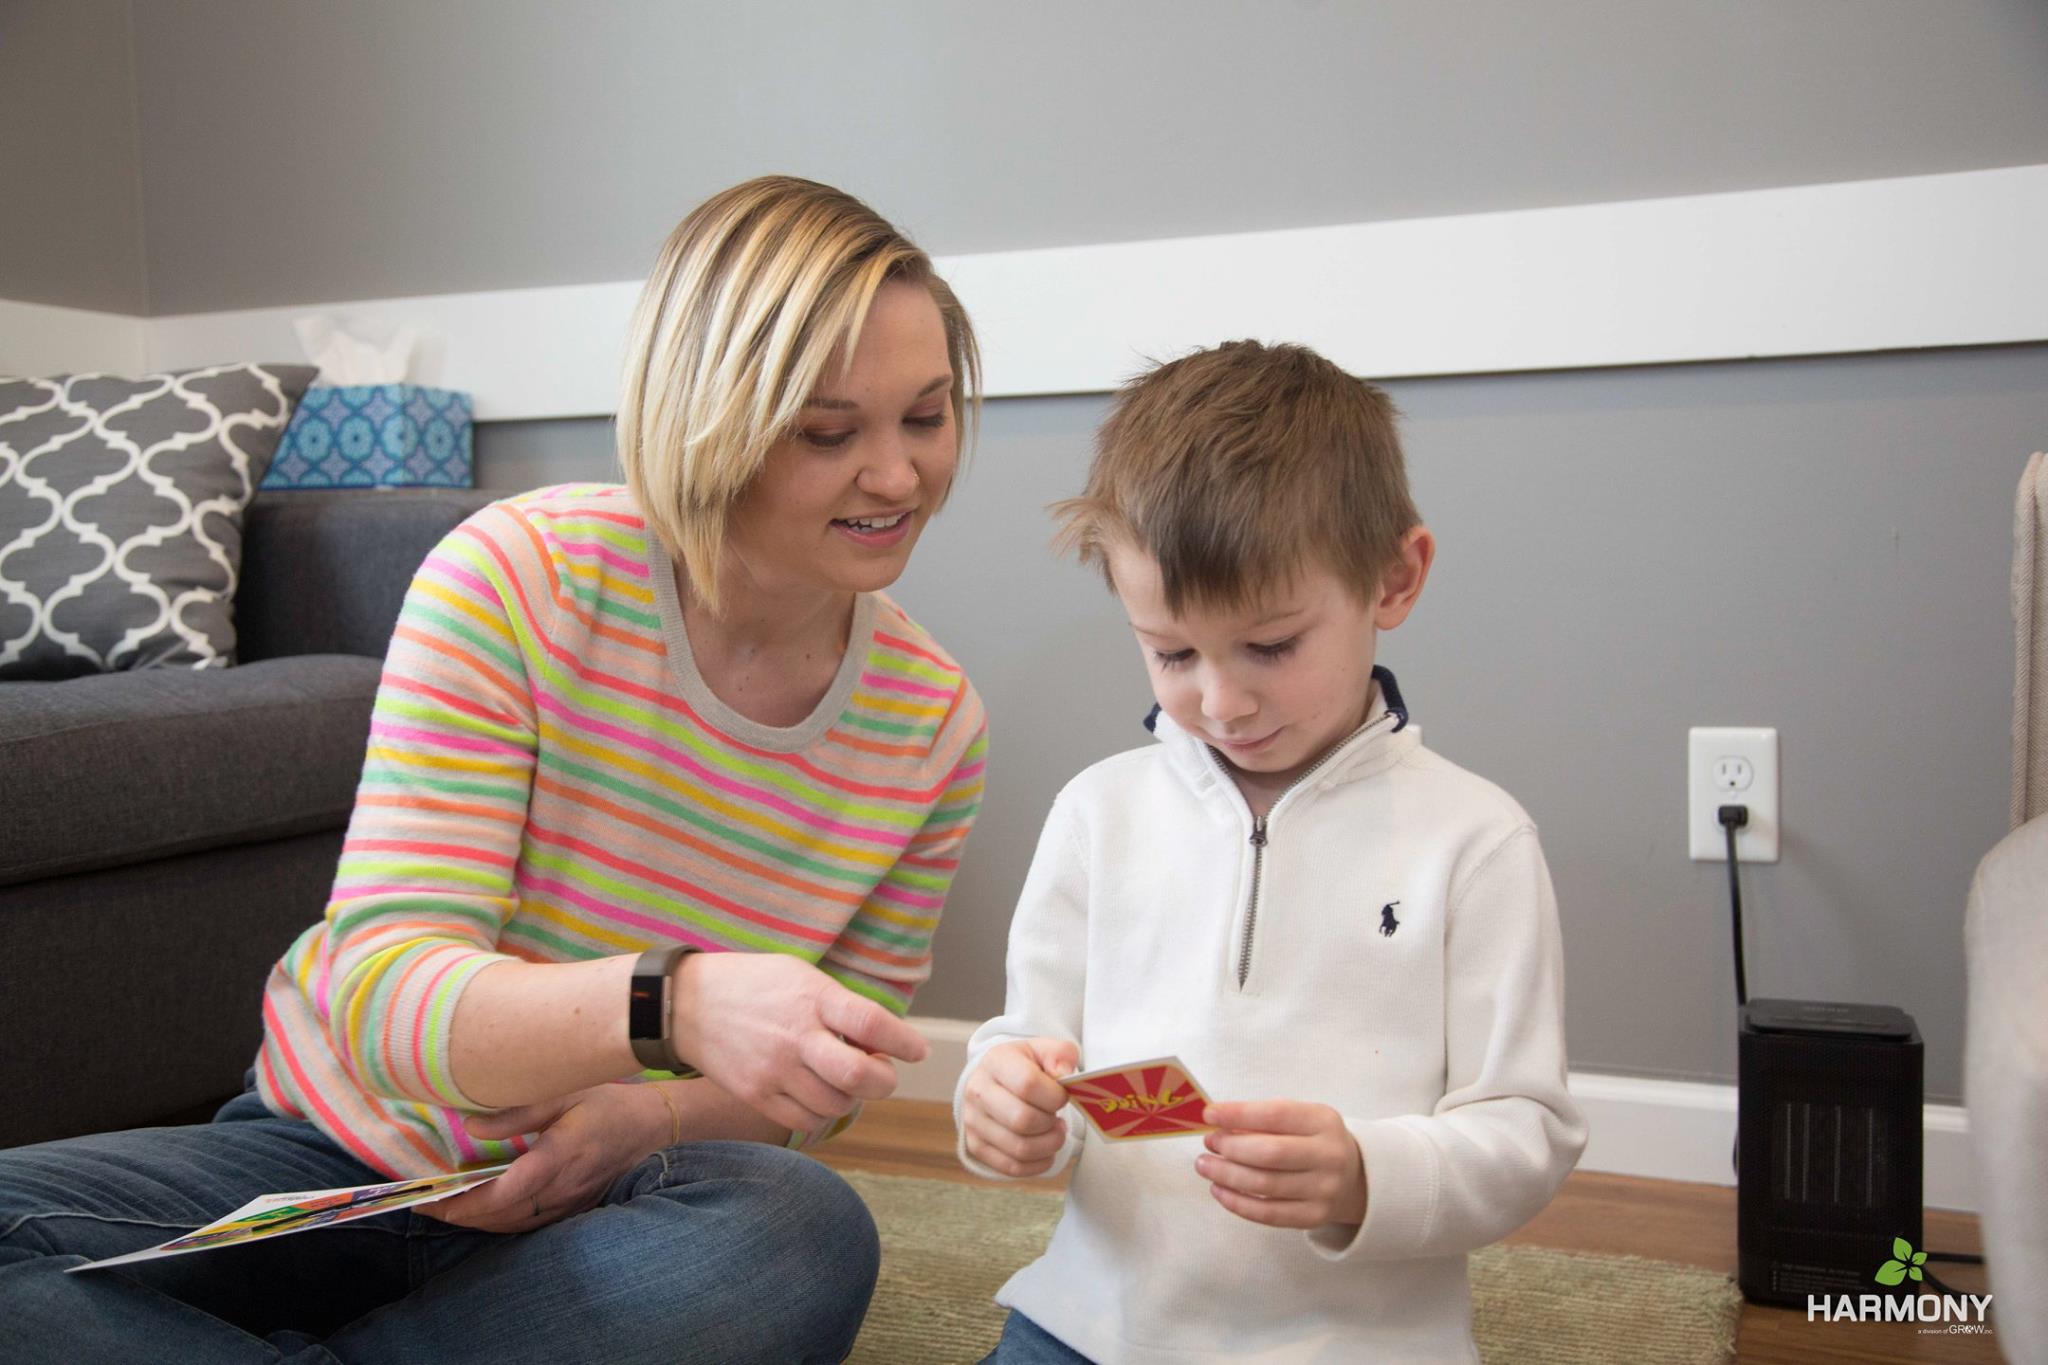 A Harmony counselor with short blonde hair wearing a beige sweater with color stripes looks at a card with a young boy in a white quarter zip.